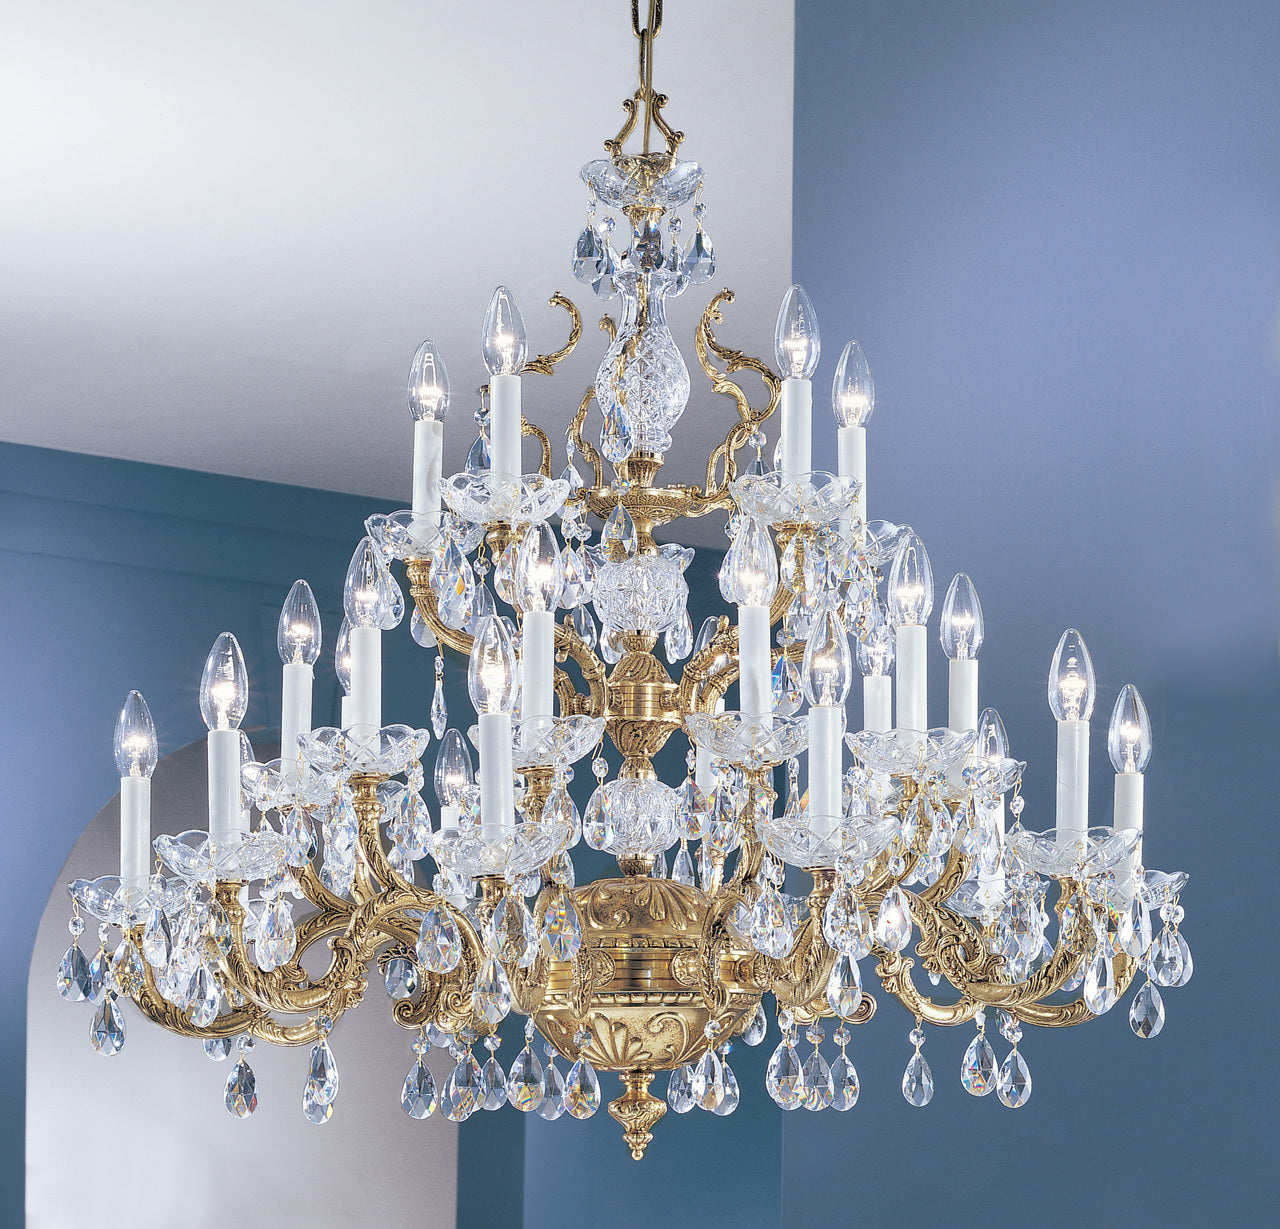 Classic Lighting 5535 RB SGT Madrid Crystal/Cast Brass Chandelier in Roman Bronze (Imported from Spain)